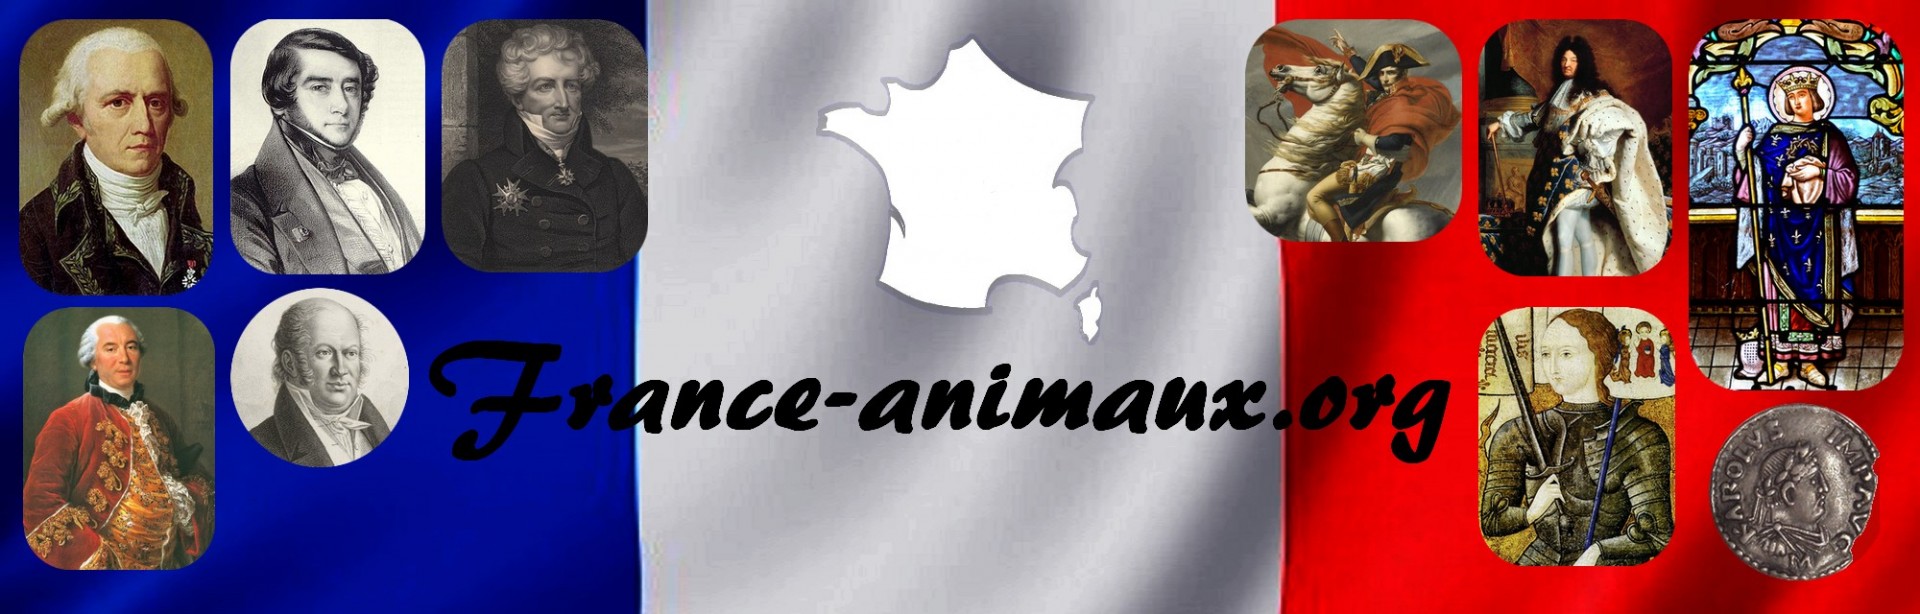 France-animaux.org